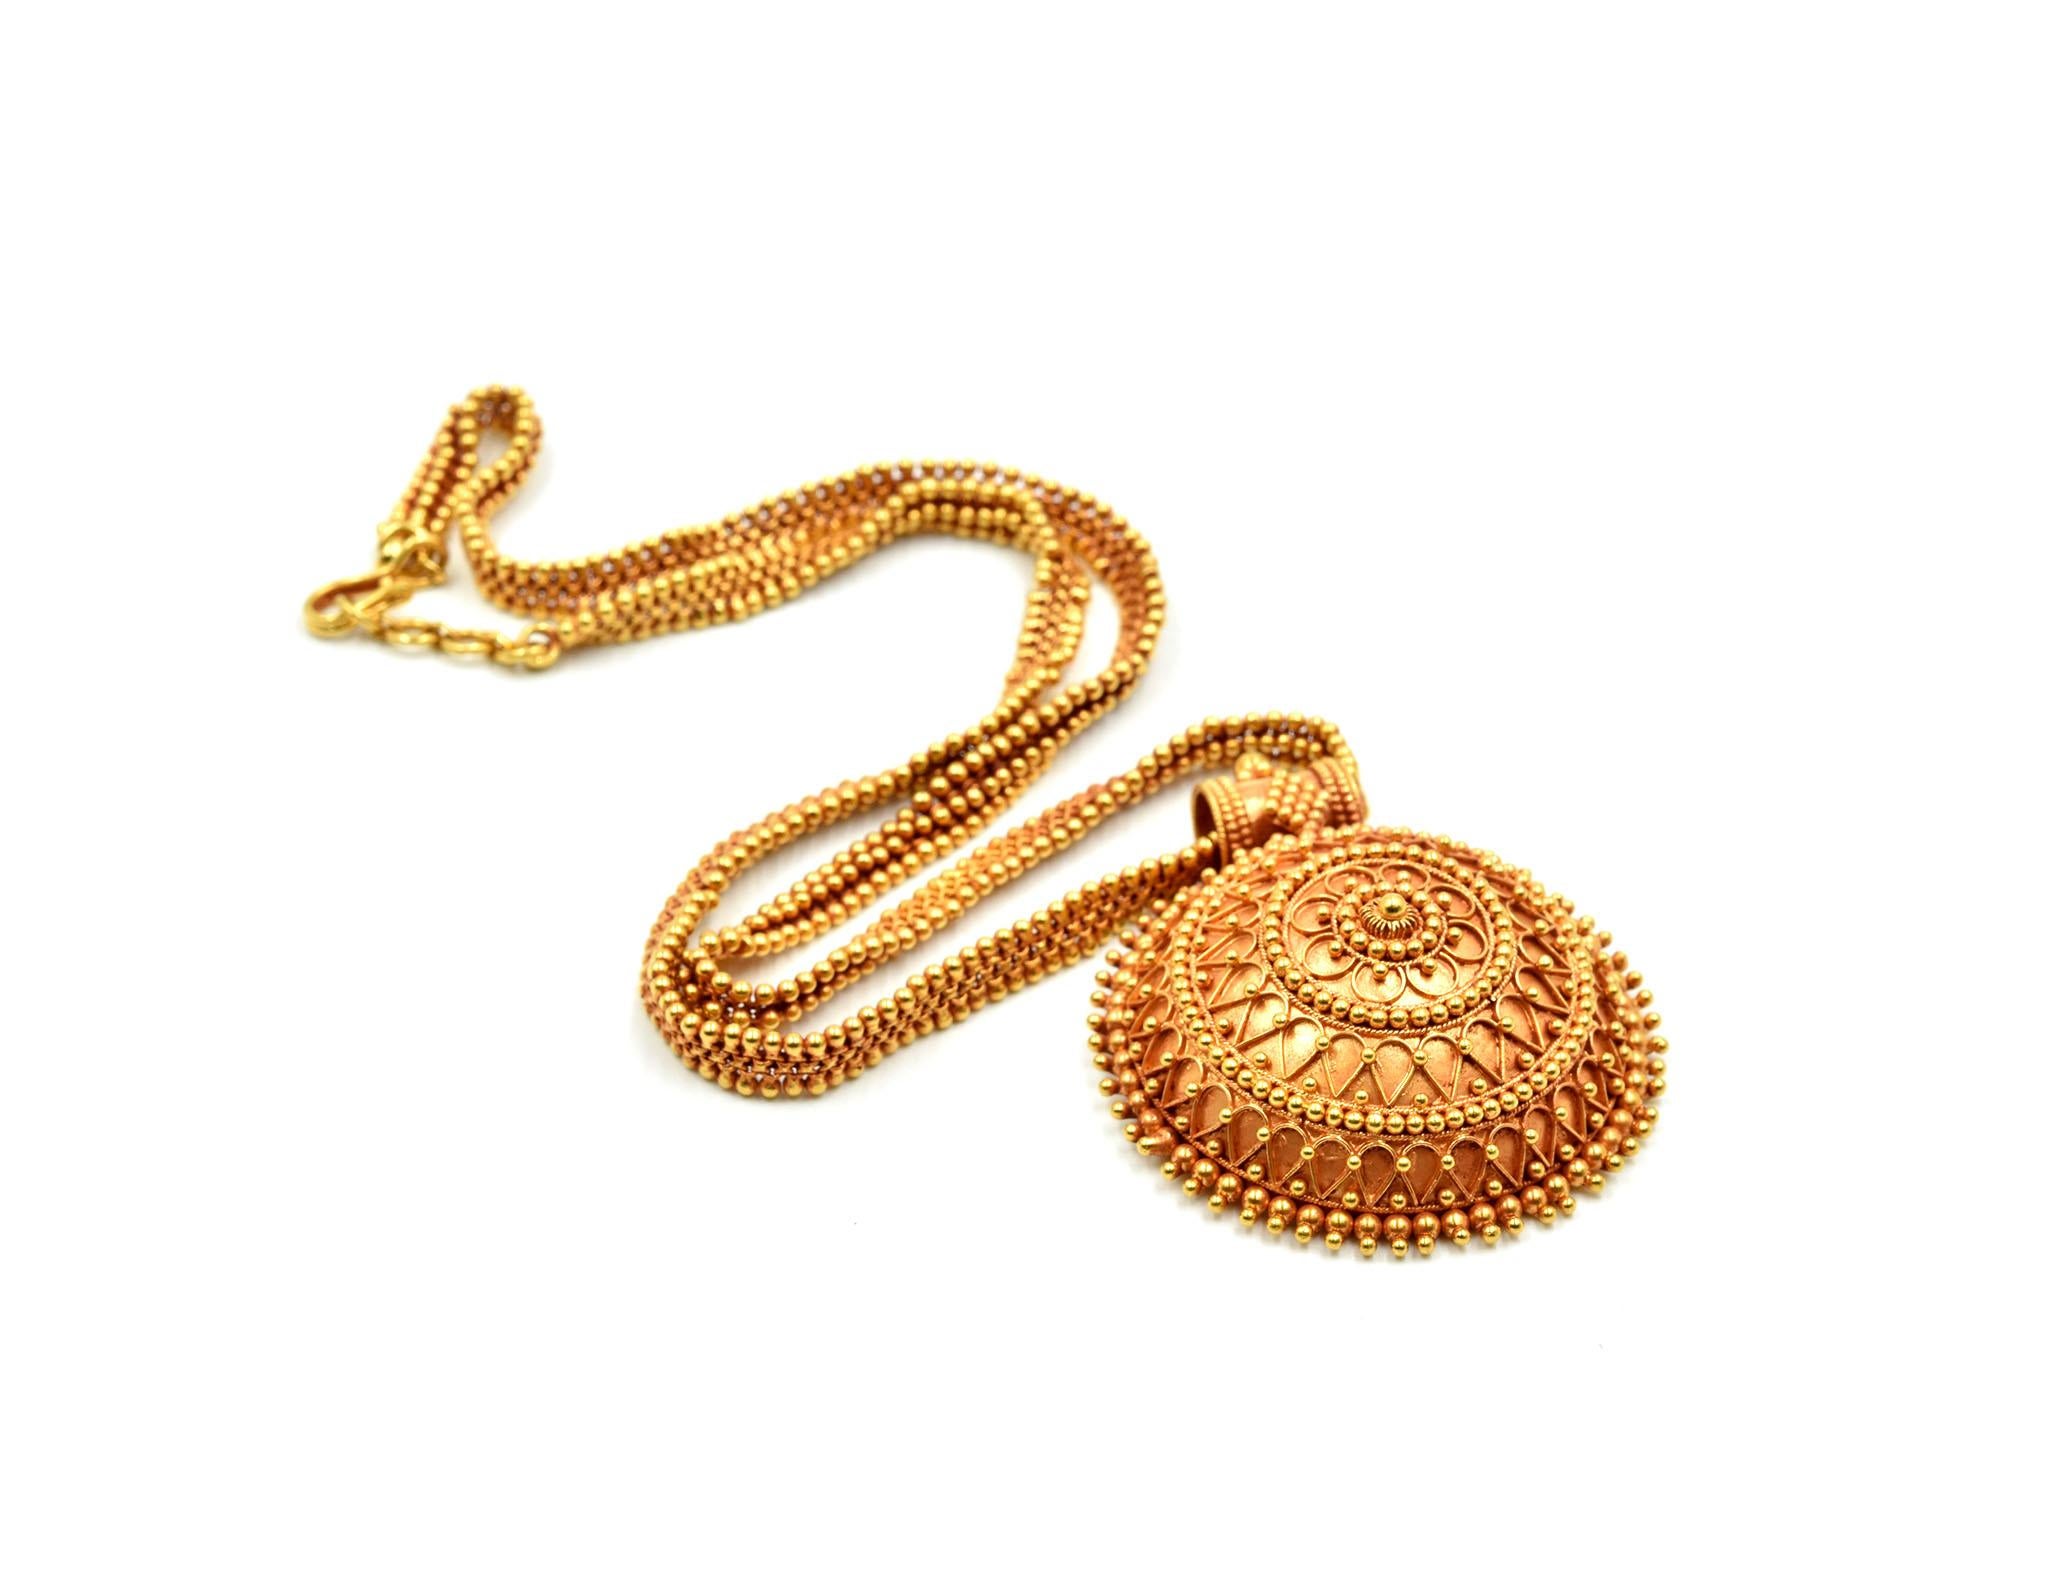 Women's 22 Karat Yellow Gold, India Style Necklace with Domed Pendant, 55.2 Grams